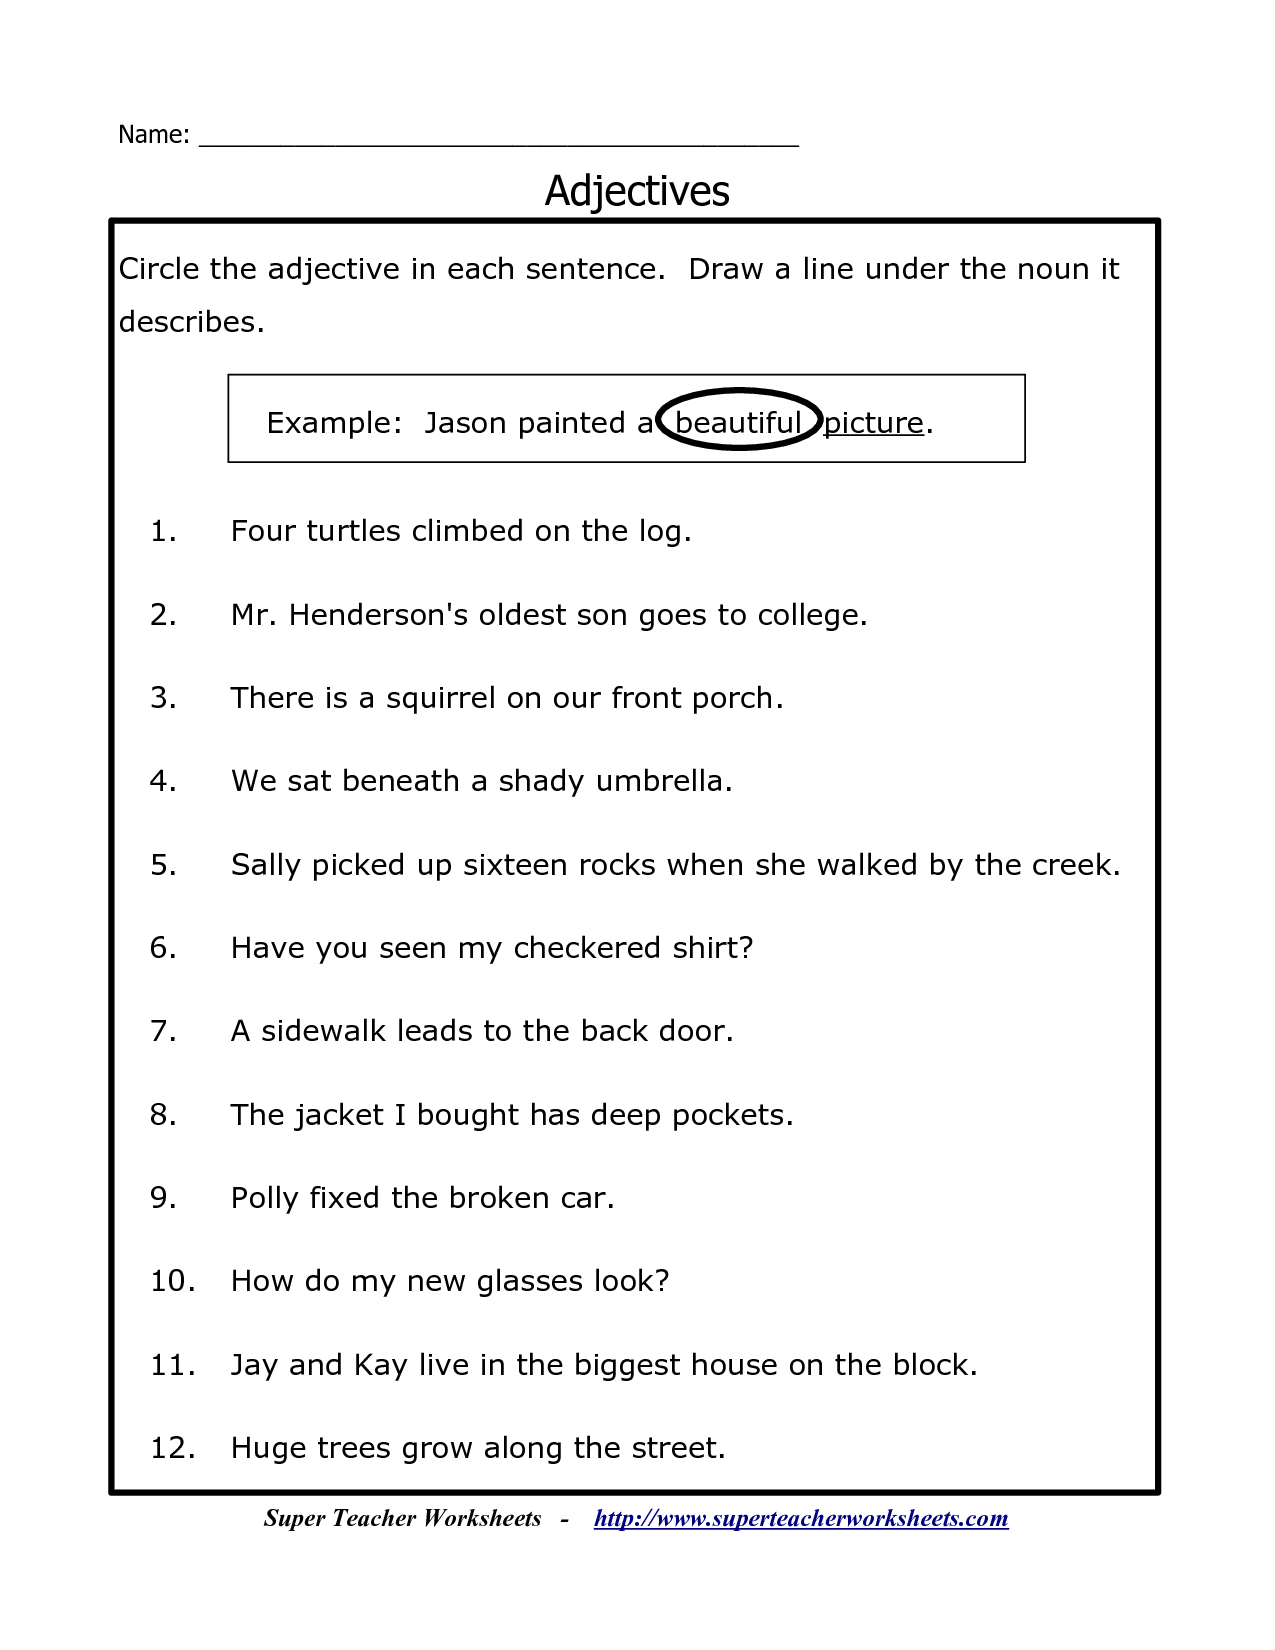 13-best-images-of-reading-sequencing-worksheets-story-sequencing-worksheets-sequence